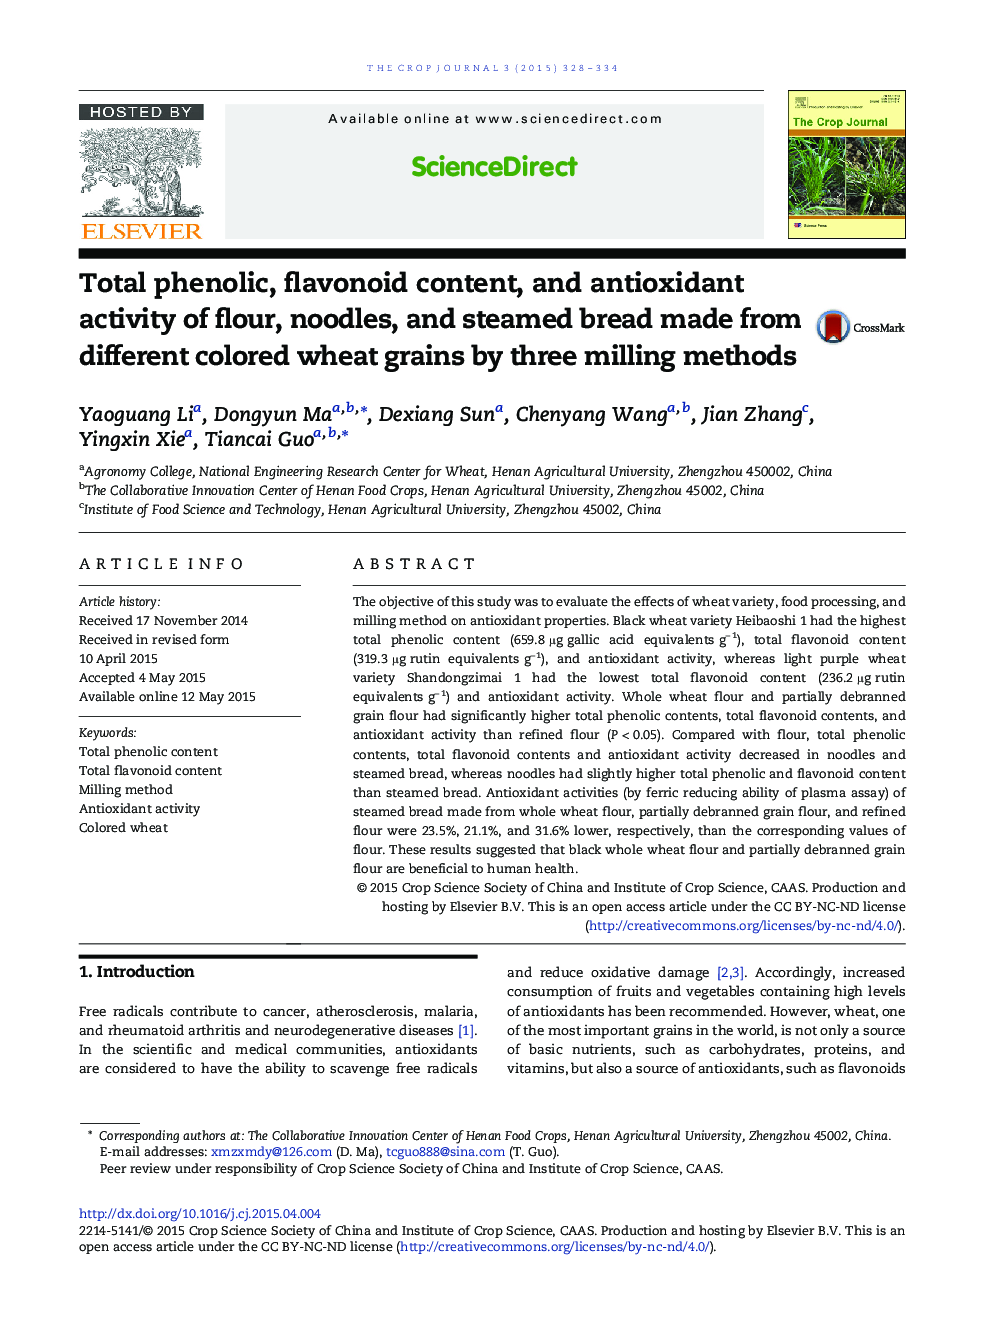 Total phenolic, flavonoid content, and antioxidant activity of flour, noodles, and steamed bread made from different colored wheat grains by three milling methods 